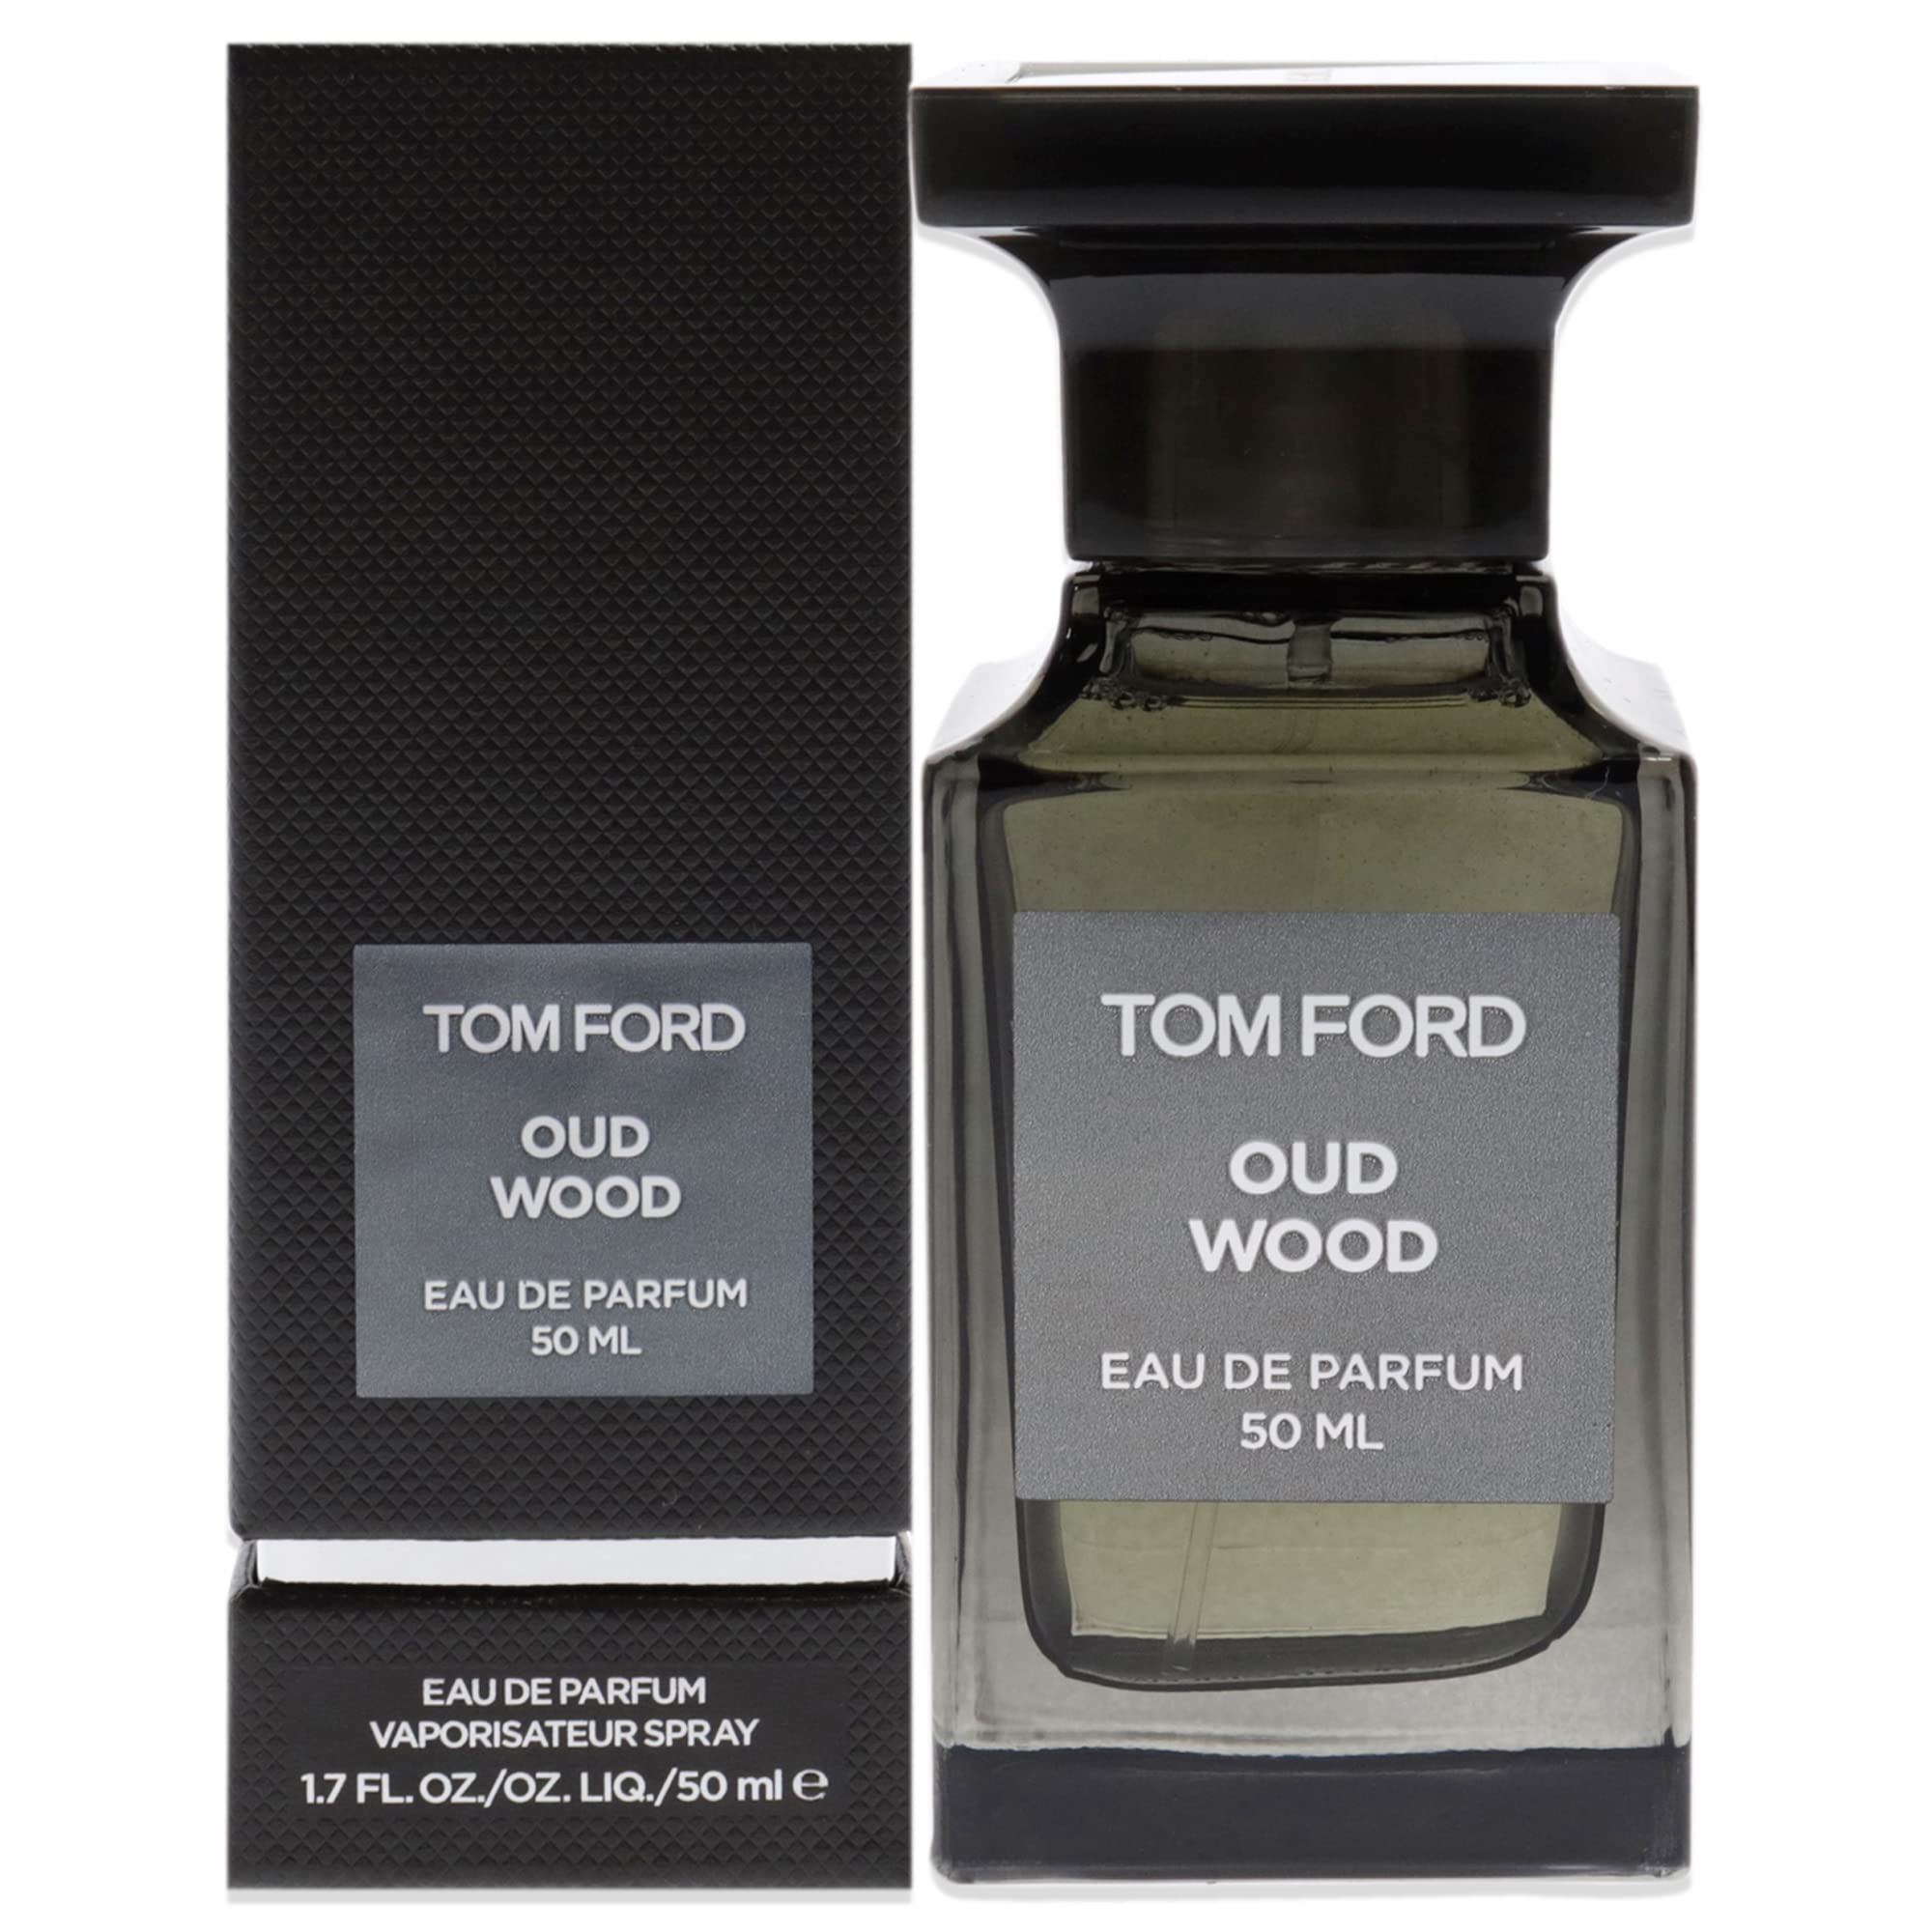 Top 33+ imagen tom ford perfume where to buy